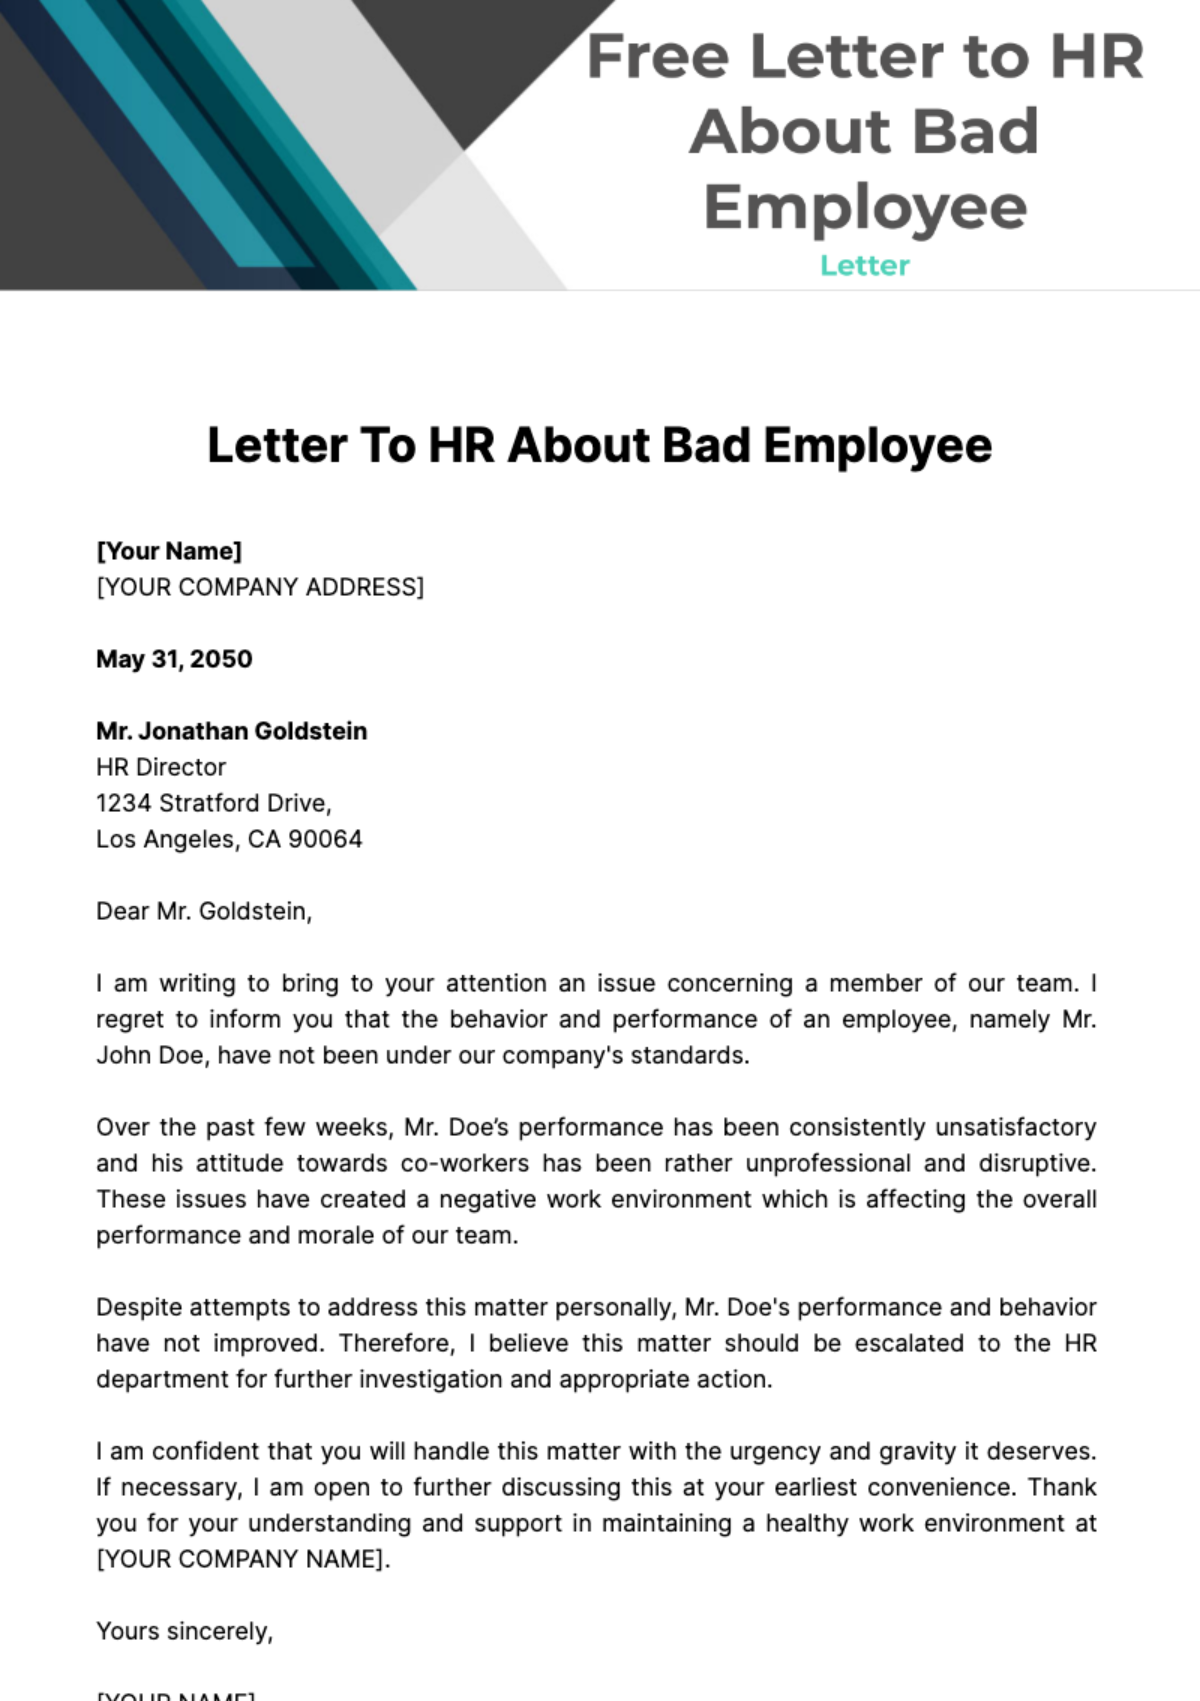 Free Letter to HR About Bad Employee Template